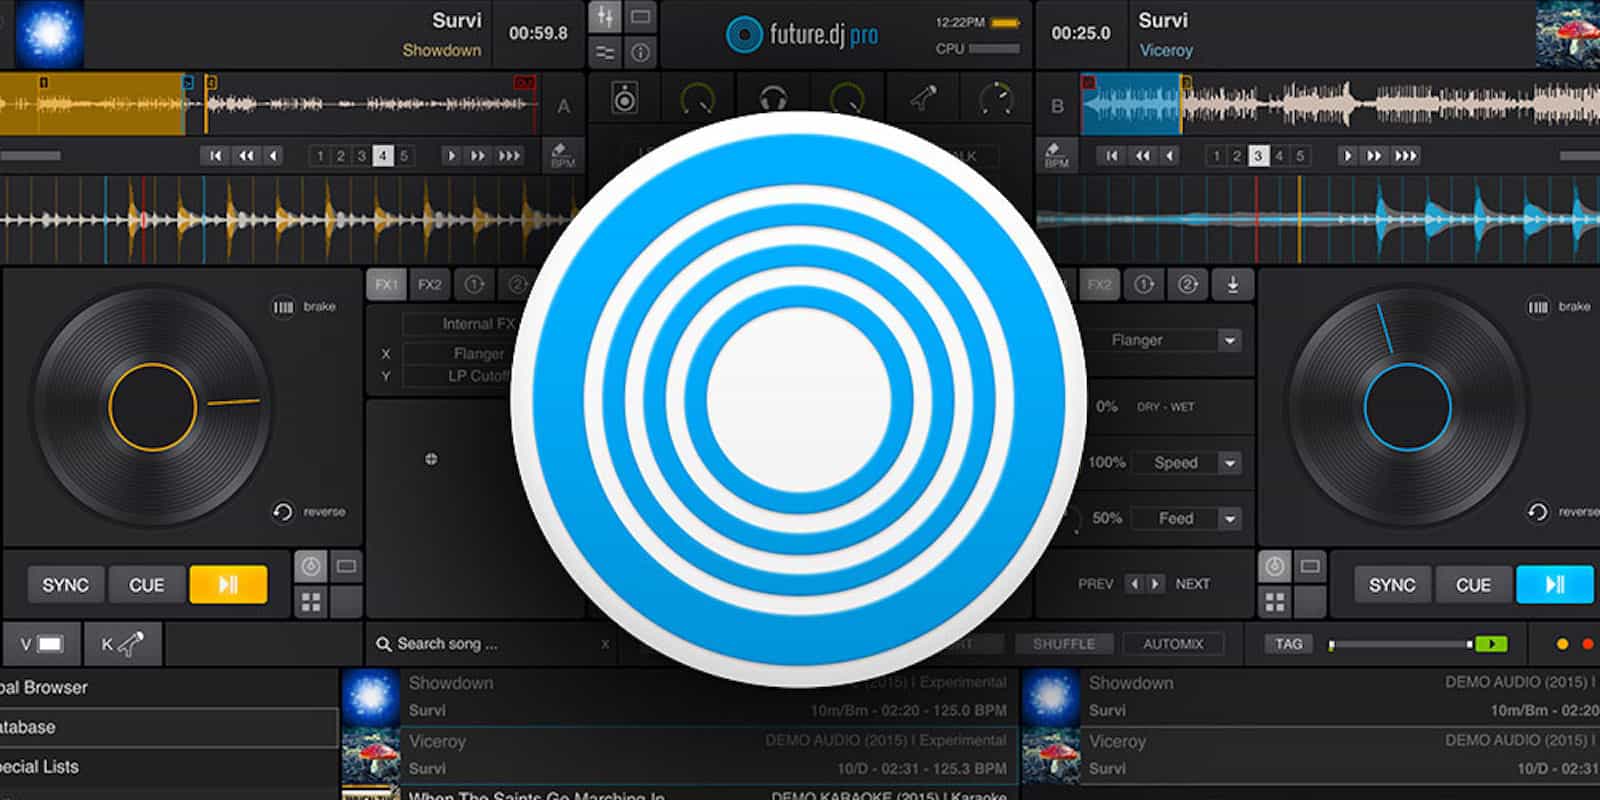 Get your hands on the deeper details of DJ-ing with this accessible yet powerful platform.